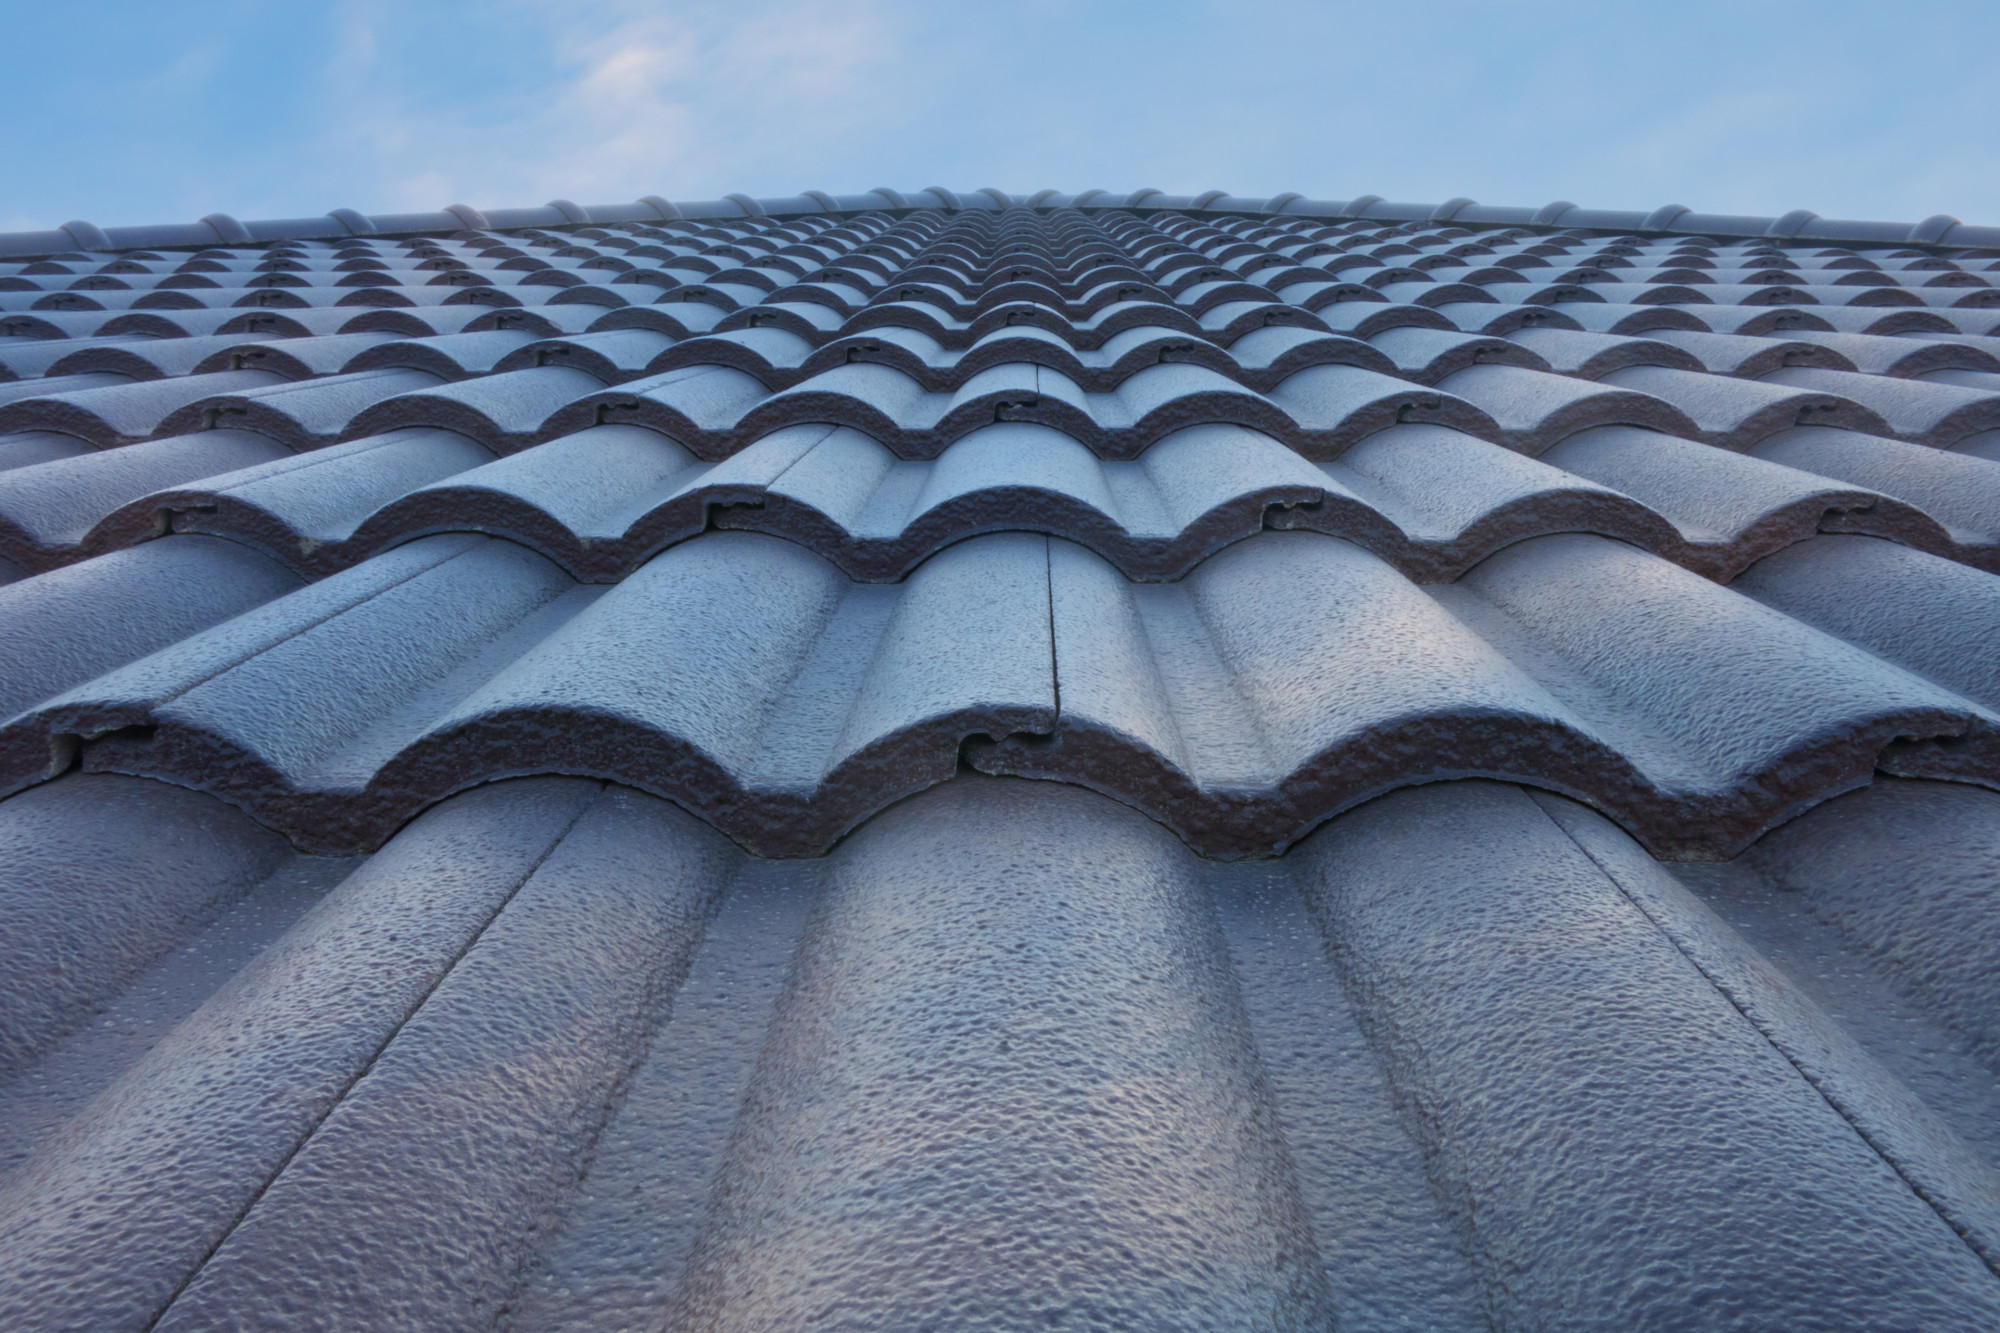 The cost of a new roof depends on its size and the materials used. We'll go over the basics here and what you can expect to pay.